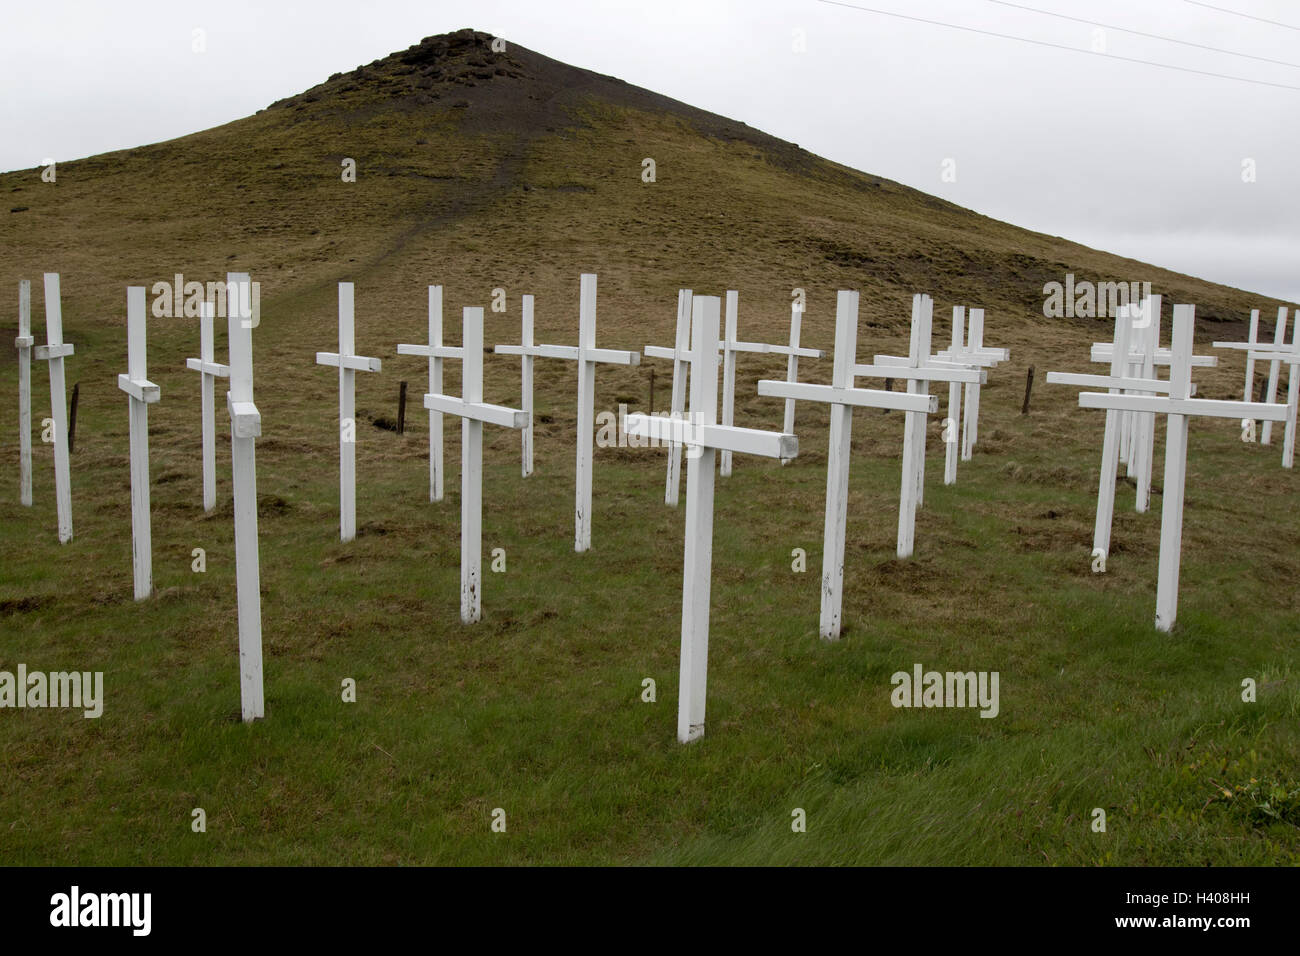 field of crosses memorial to those killed on the main road between reykjavik and selfoss as a warning for dangerous driving cond Stock Photo